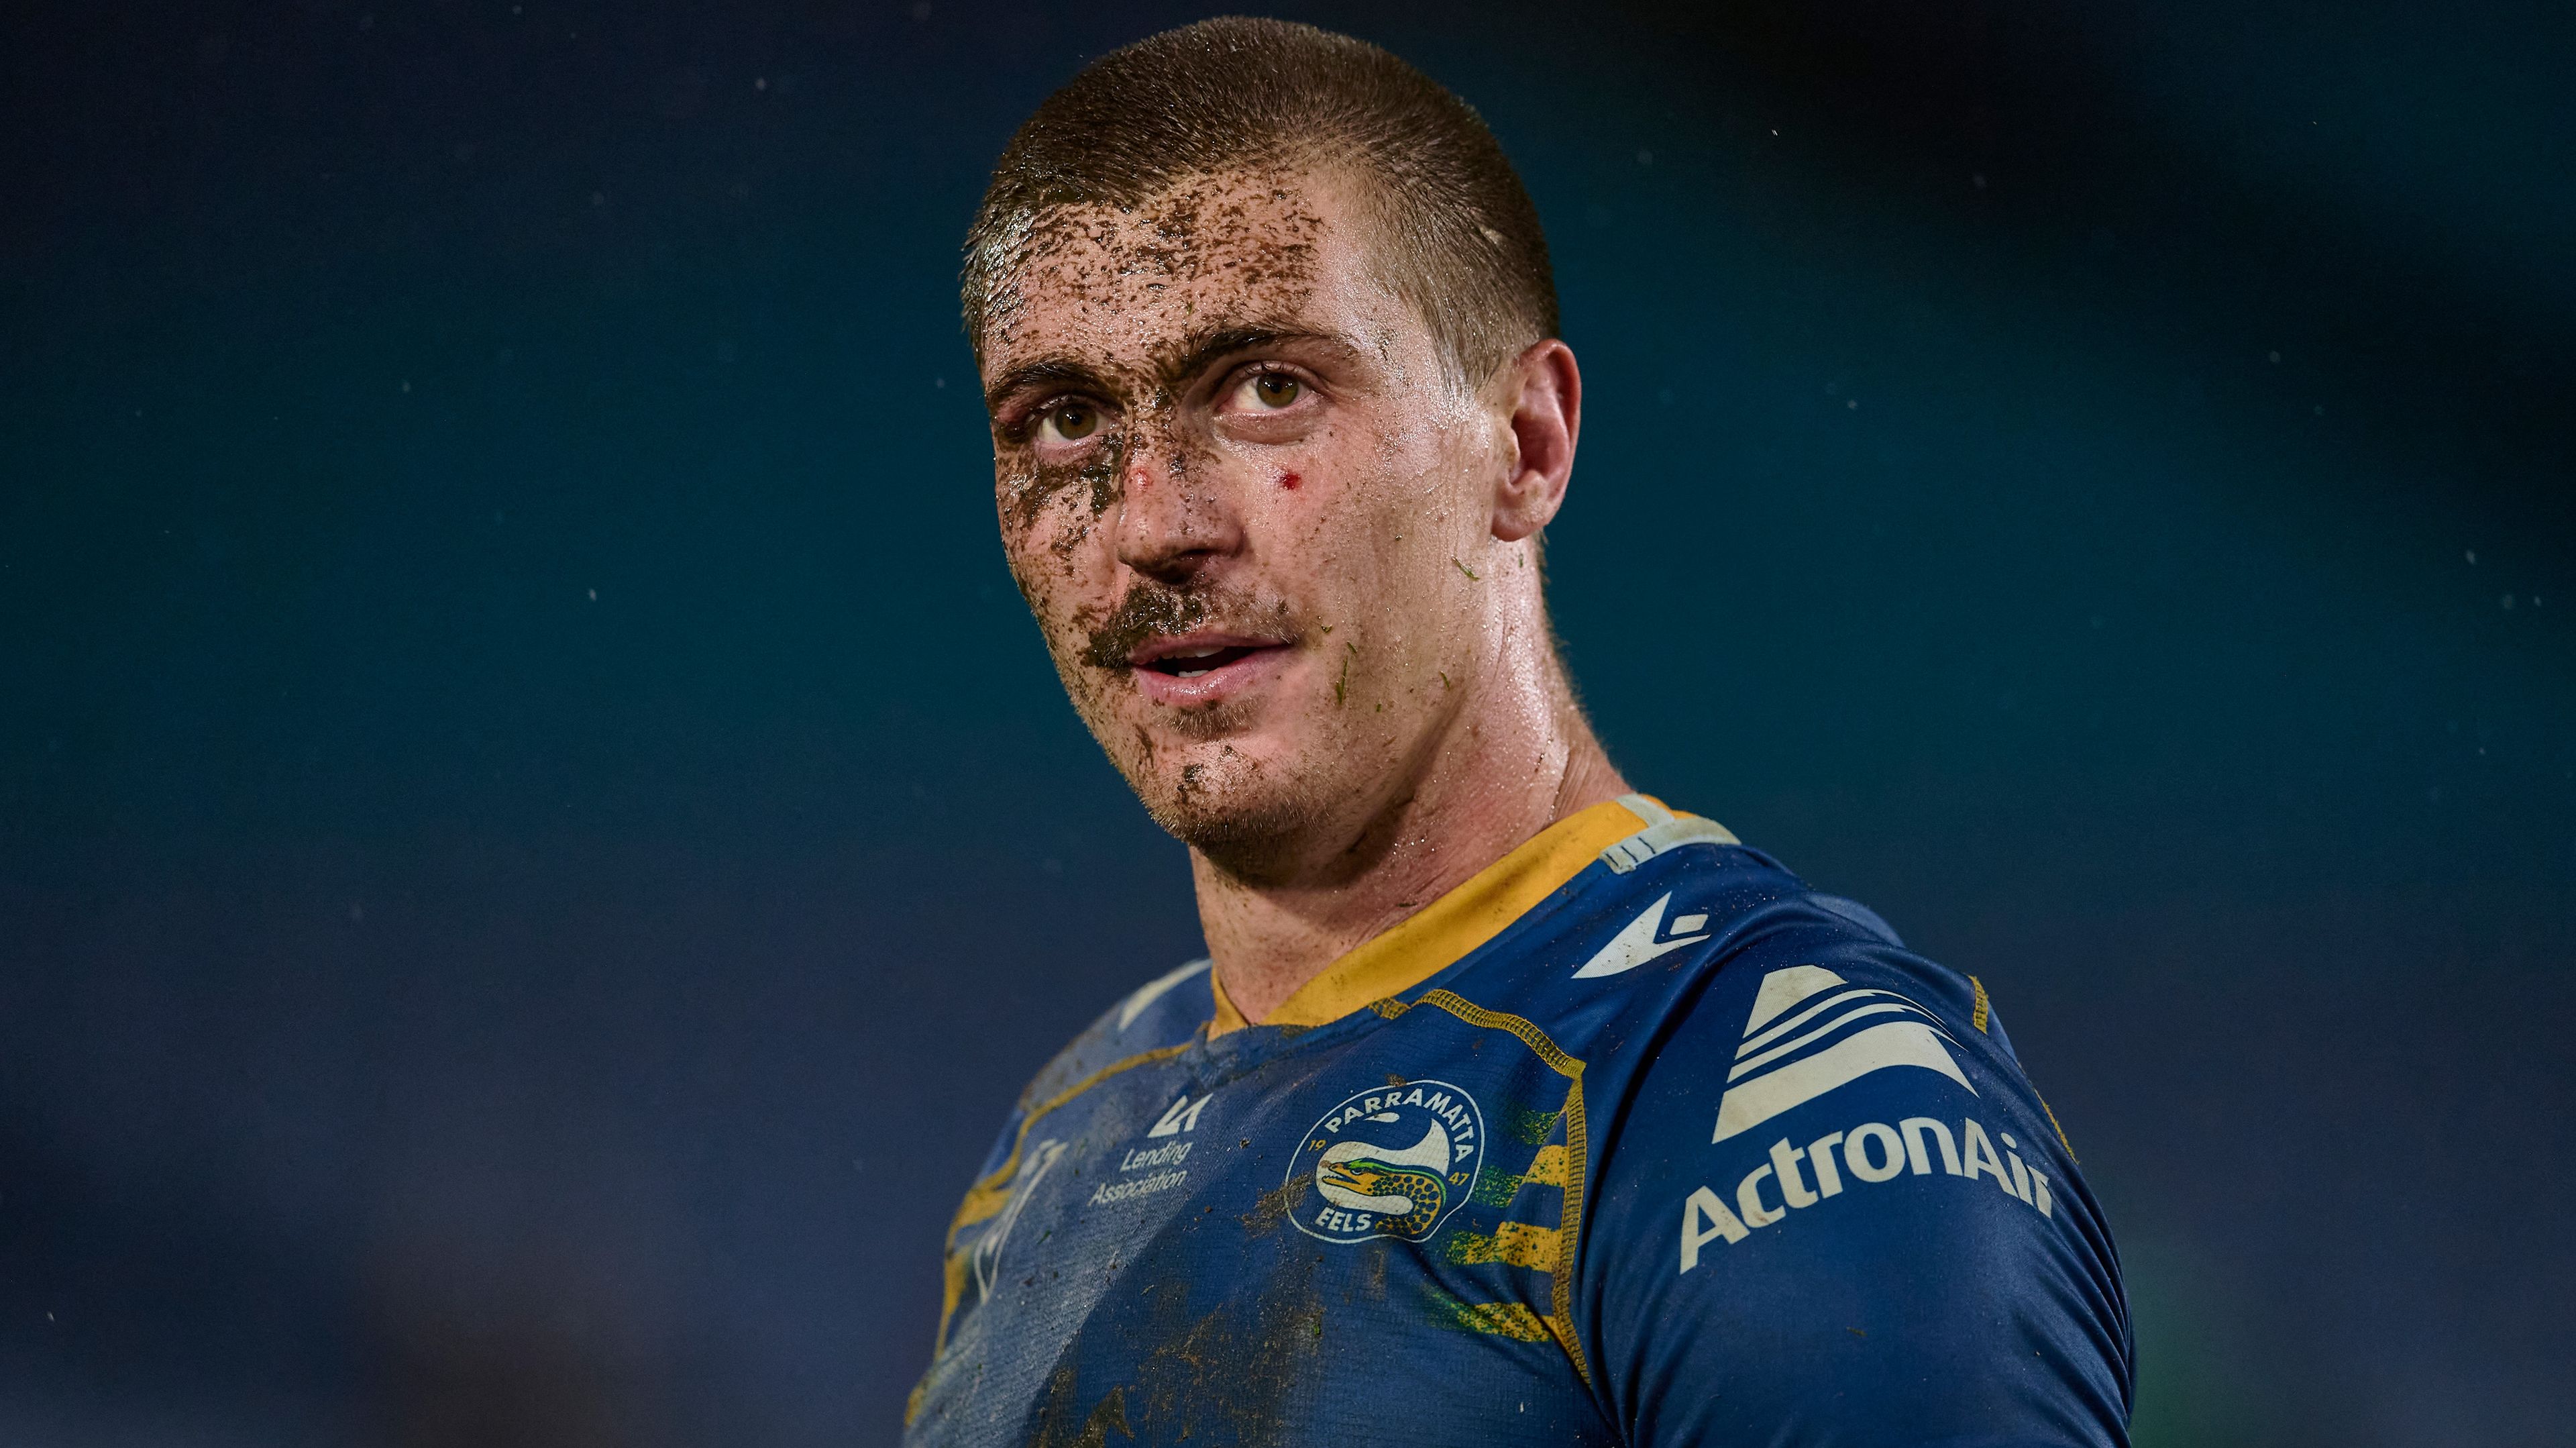 Shaun Lane of the Eels is pictured during the round 16 NRL match between the South Sydney Rabbitohs and the Parramatta Eels at Stadium Australia, on July 02, 2022, in Sydney, Australia. (Photo by Brett Hemmings/Getty Images)